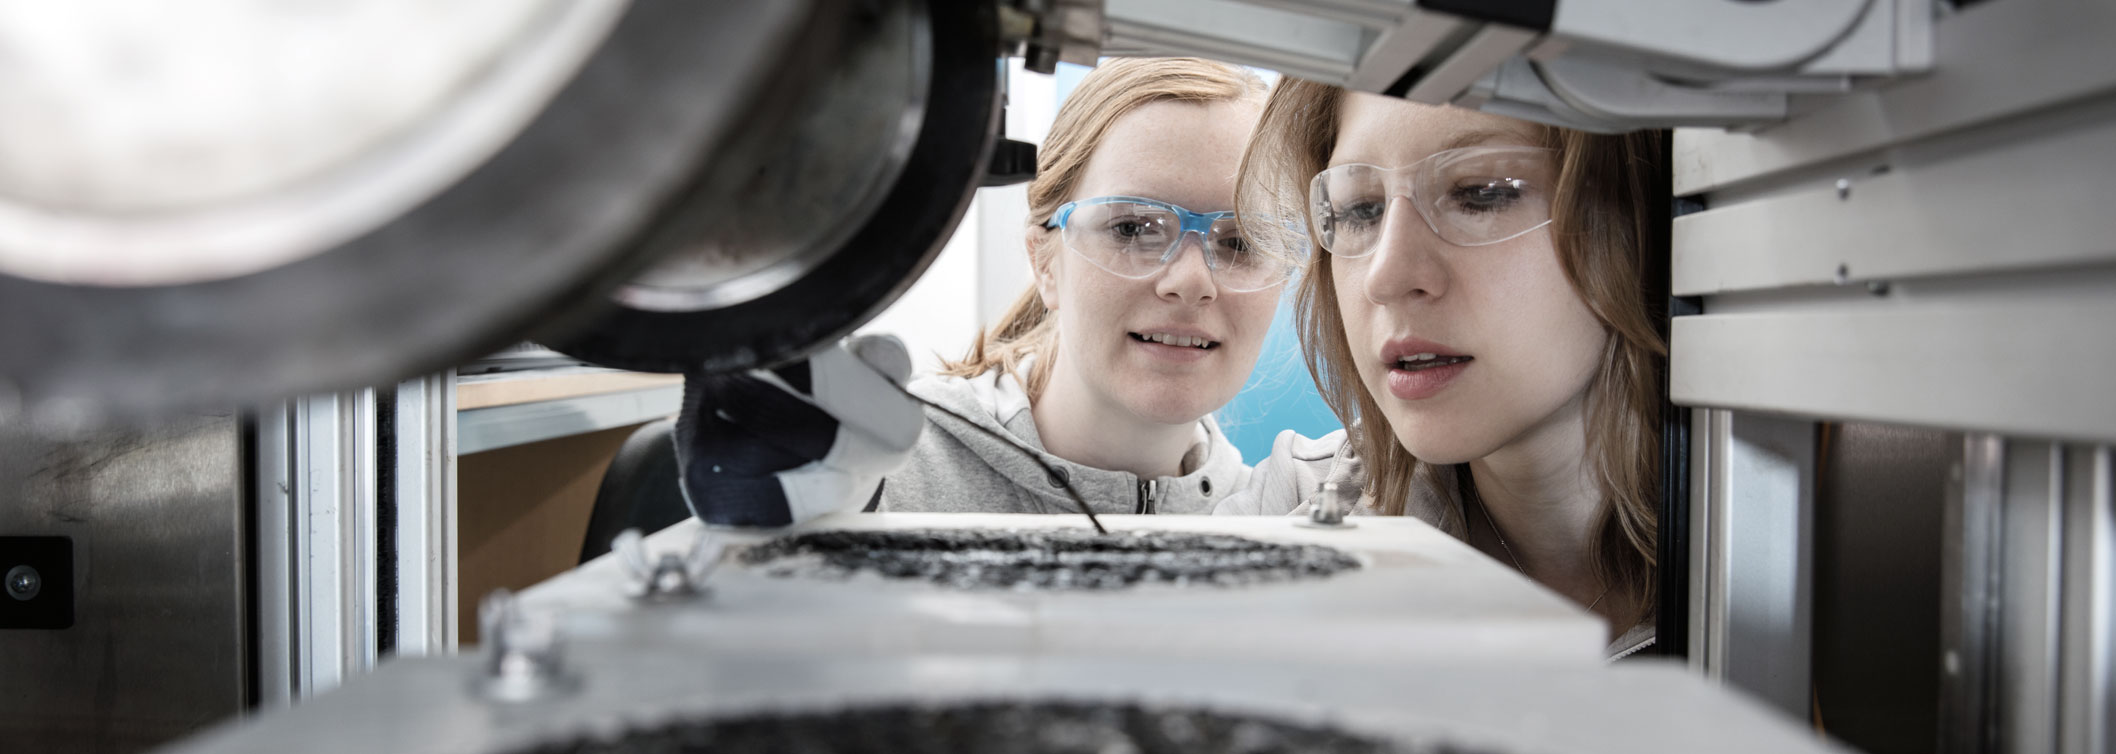 Photo. Two researchers testing asphalt in lab.